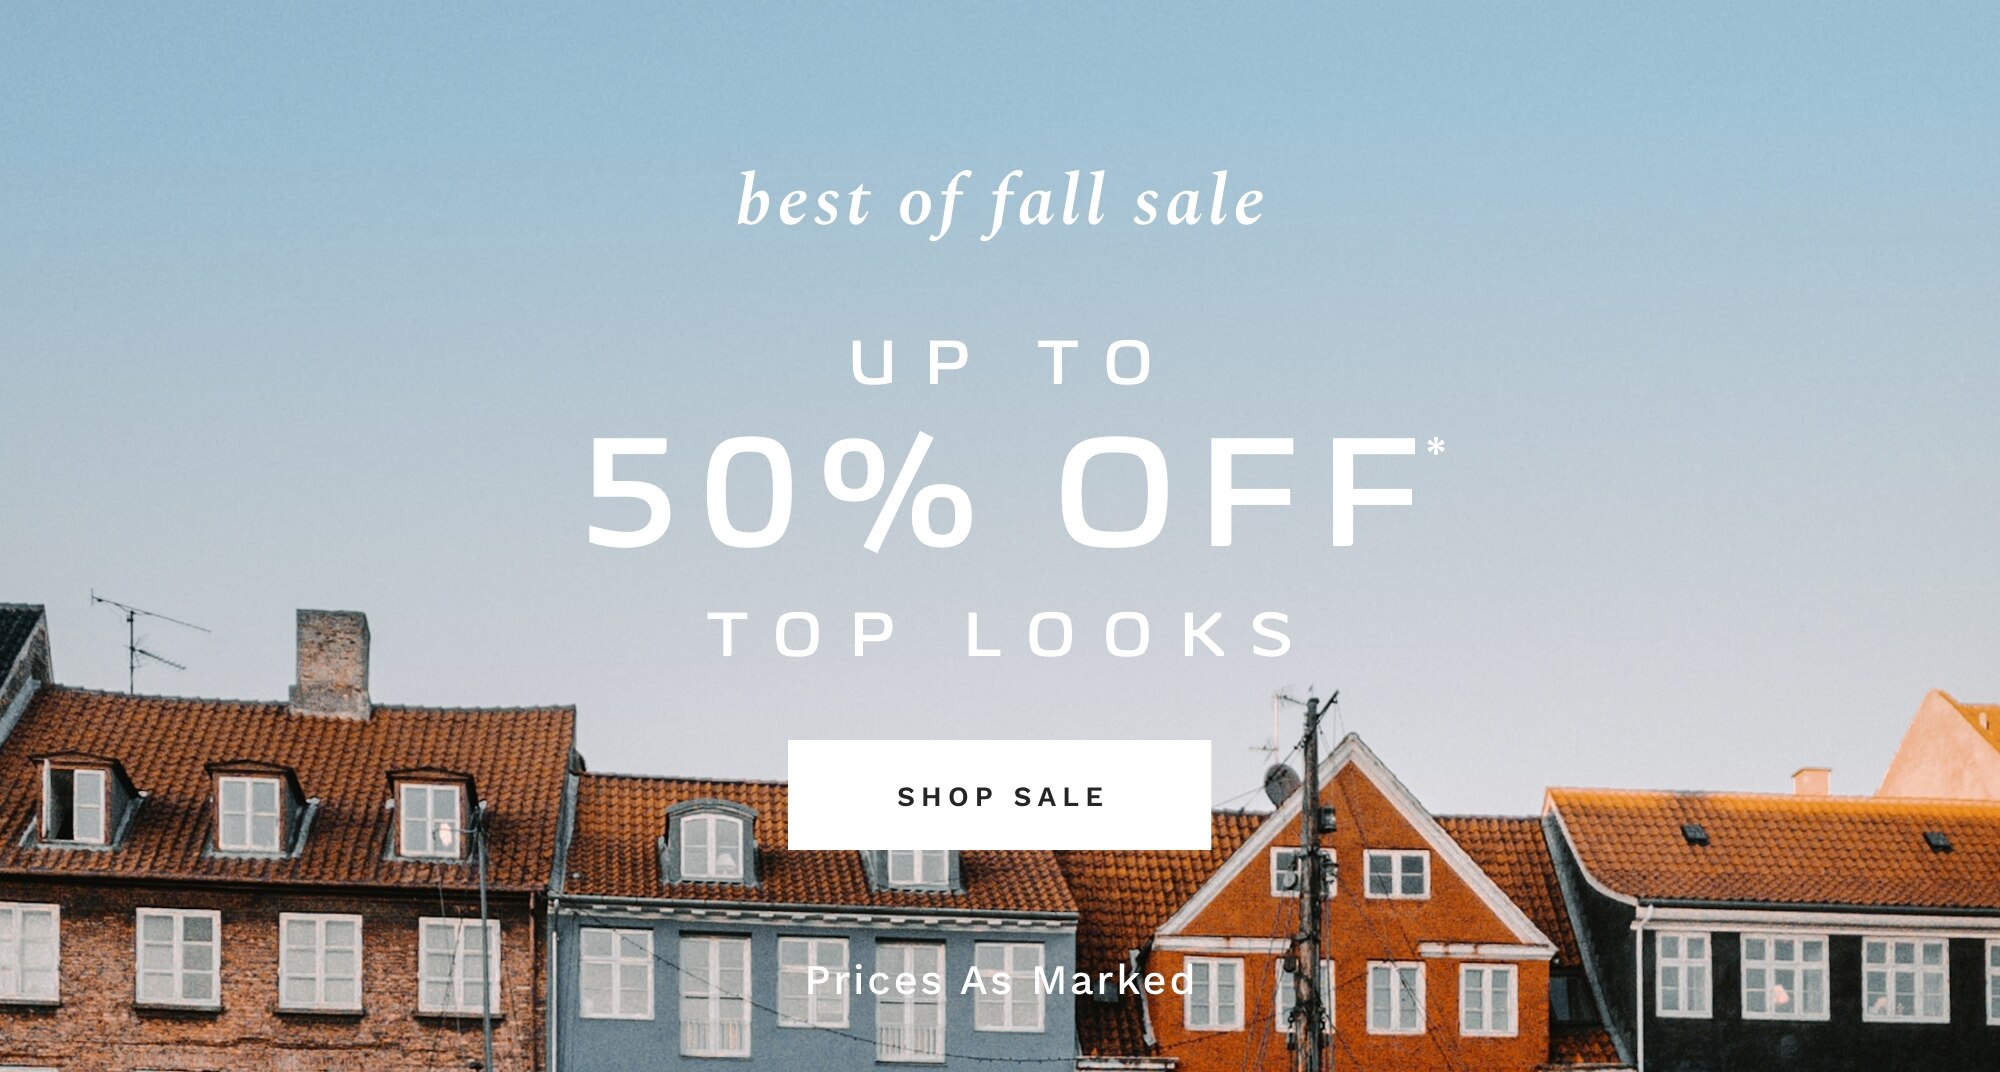 UP TO 50% OFF* TOP LOOKS